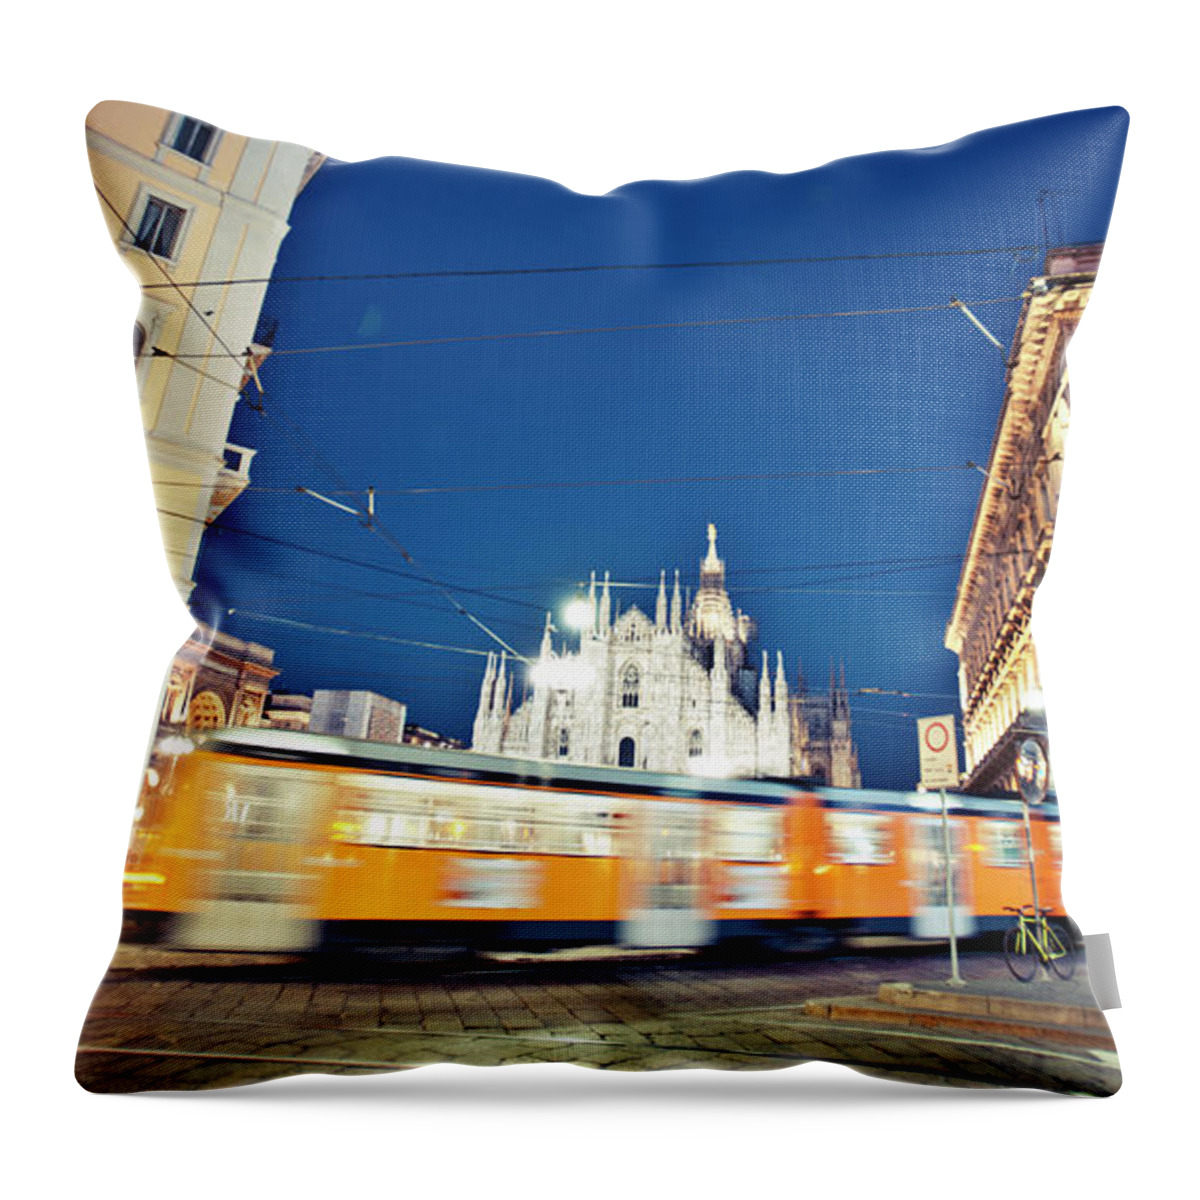 Blurred Motion Throw Pillow featuring the photograph Milan Tram In Motion by Peeterv